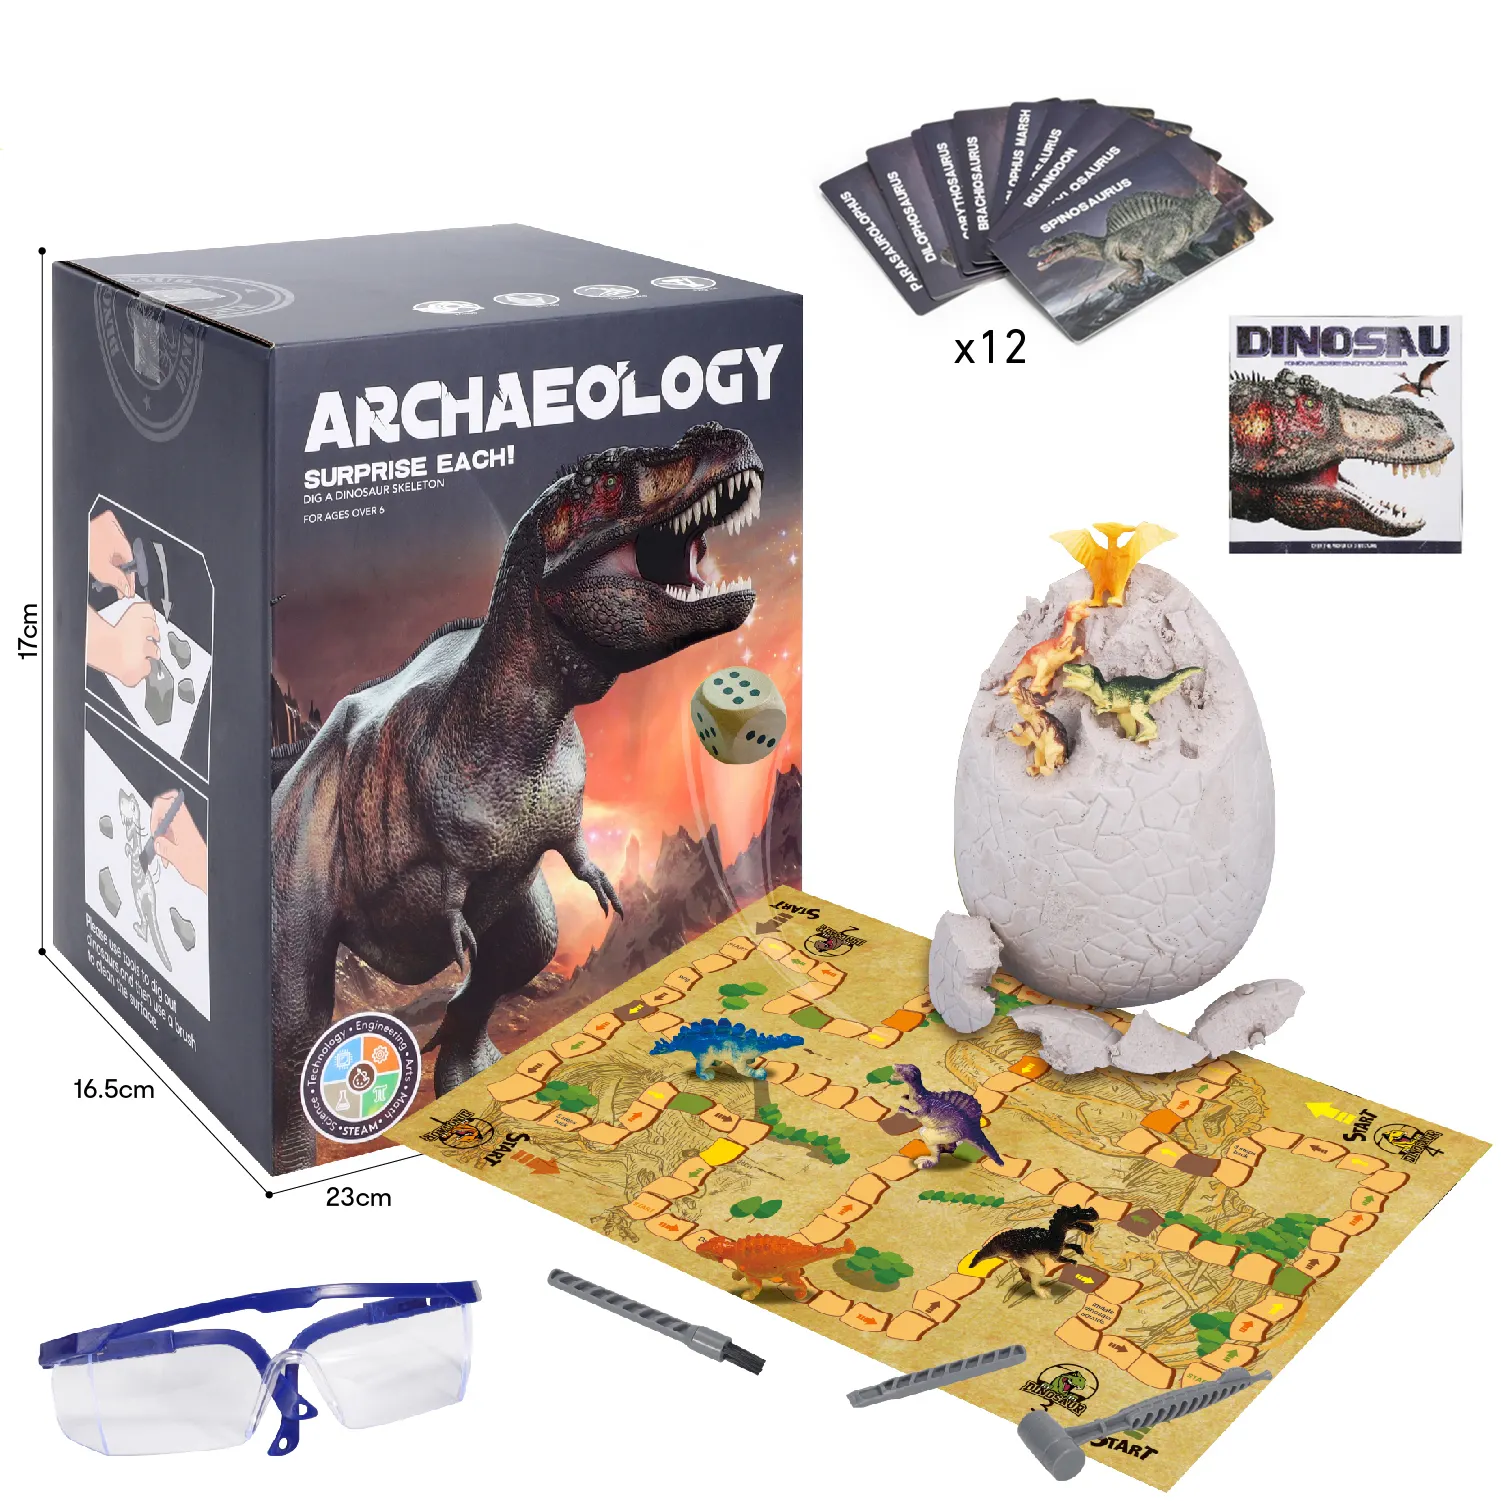 Hot Sale Dino Egg Dig Kit Dinosaur Fossil Archaeology Science Gift Educational Toy for Kids